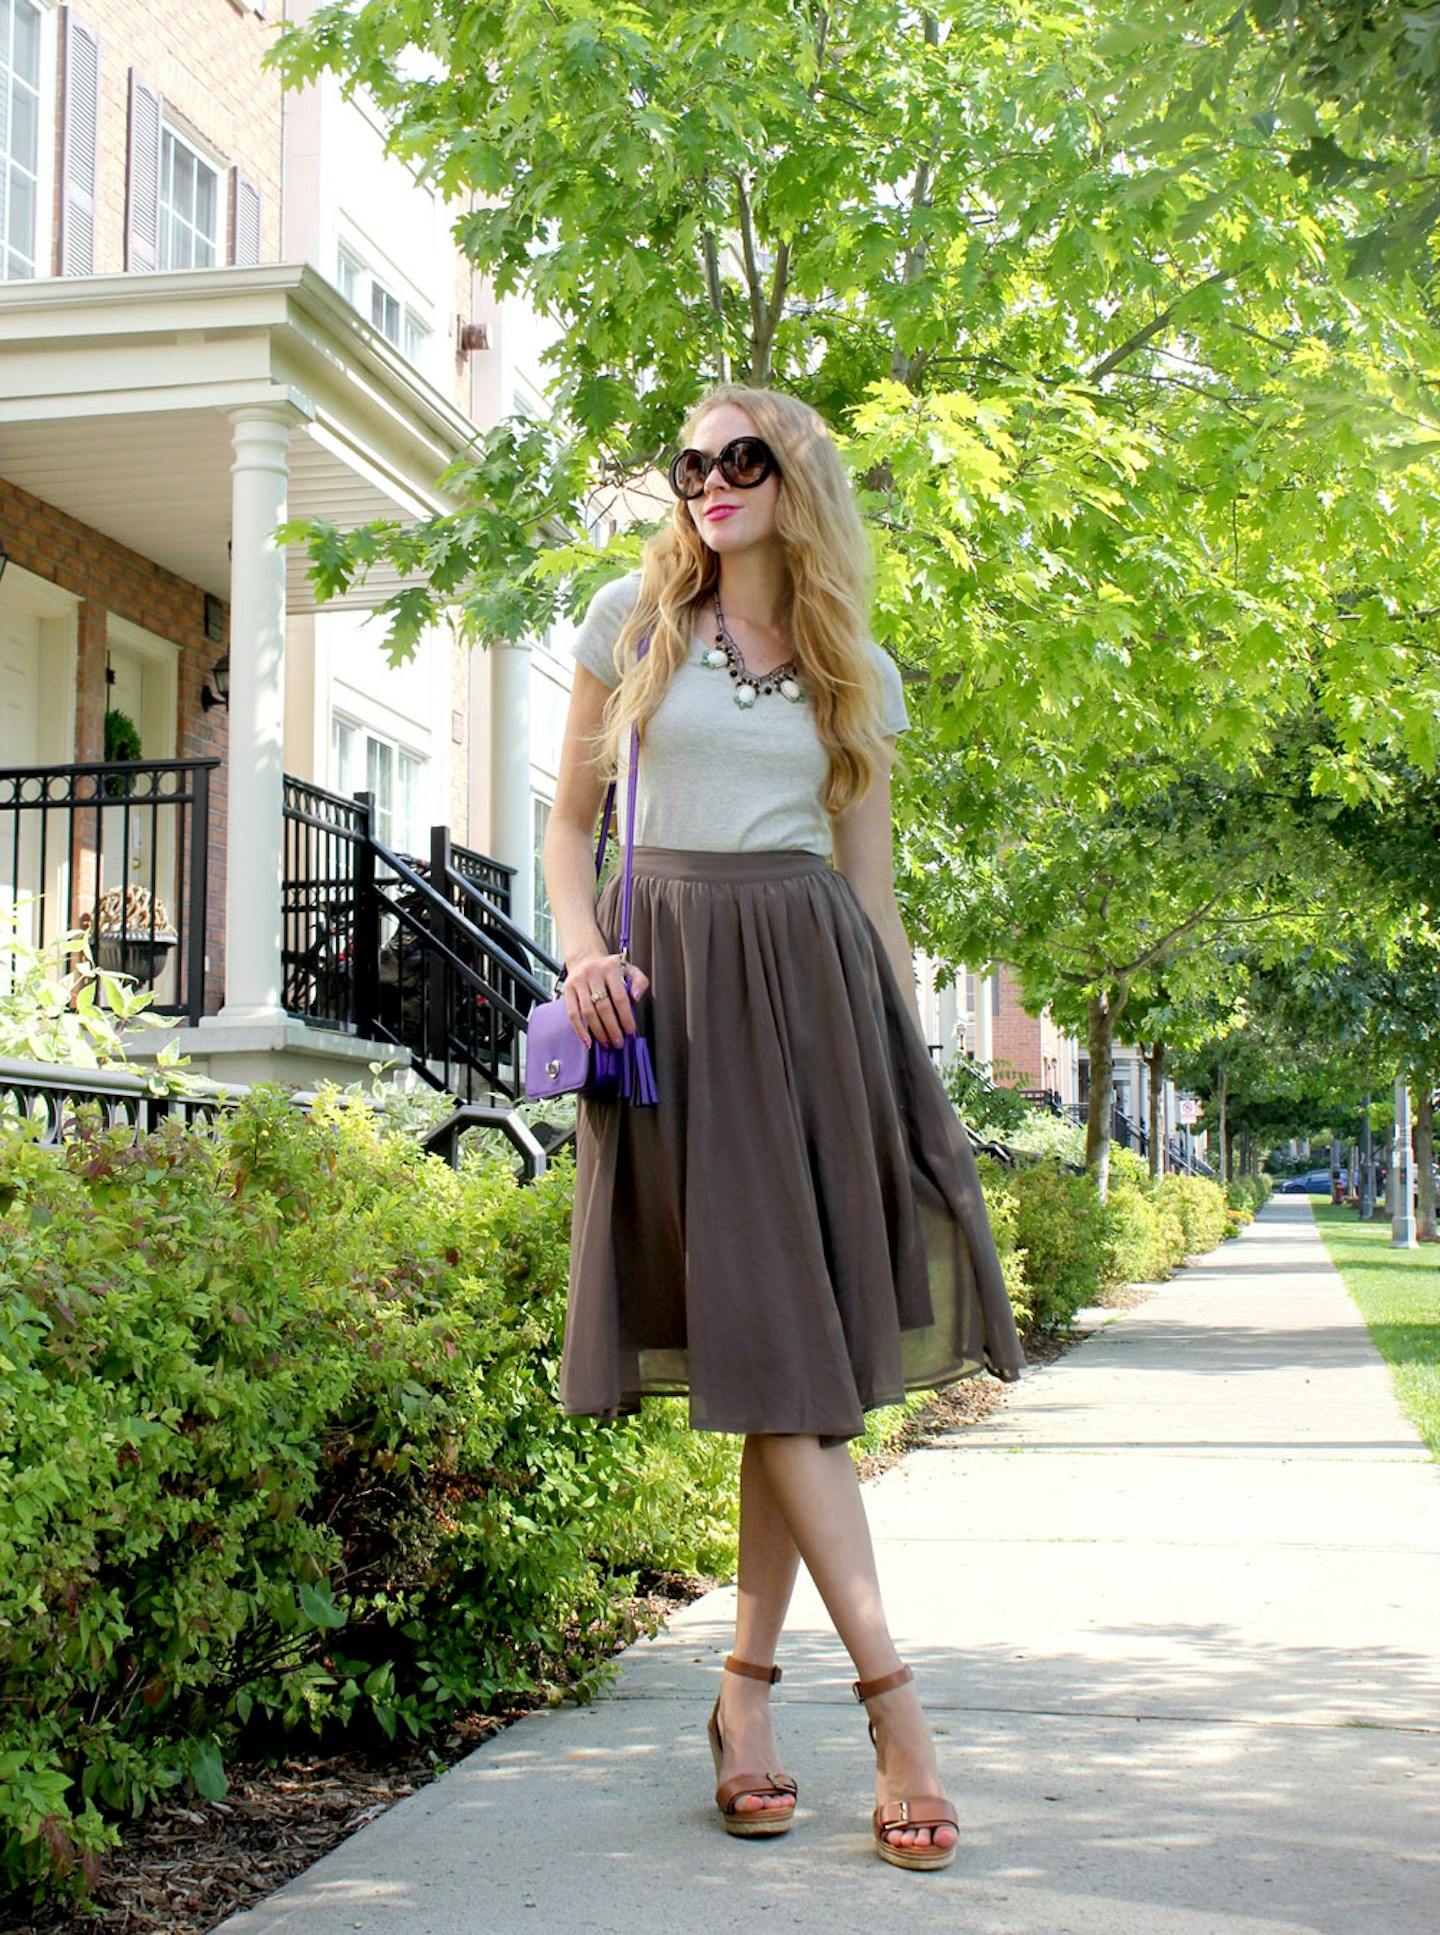 Skirts that go from summer to fall